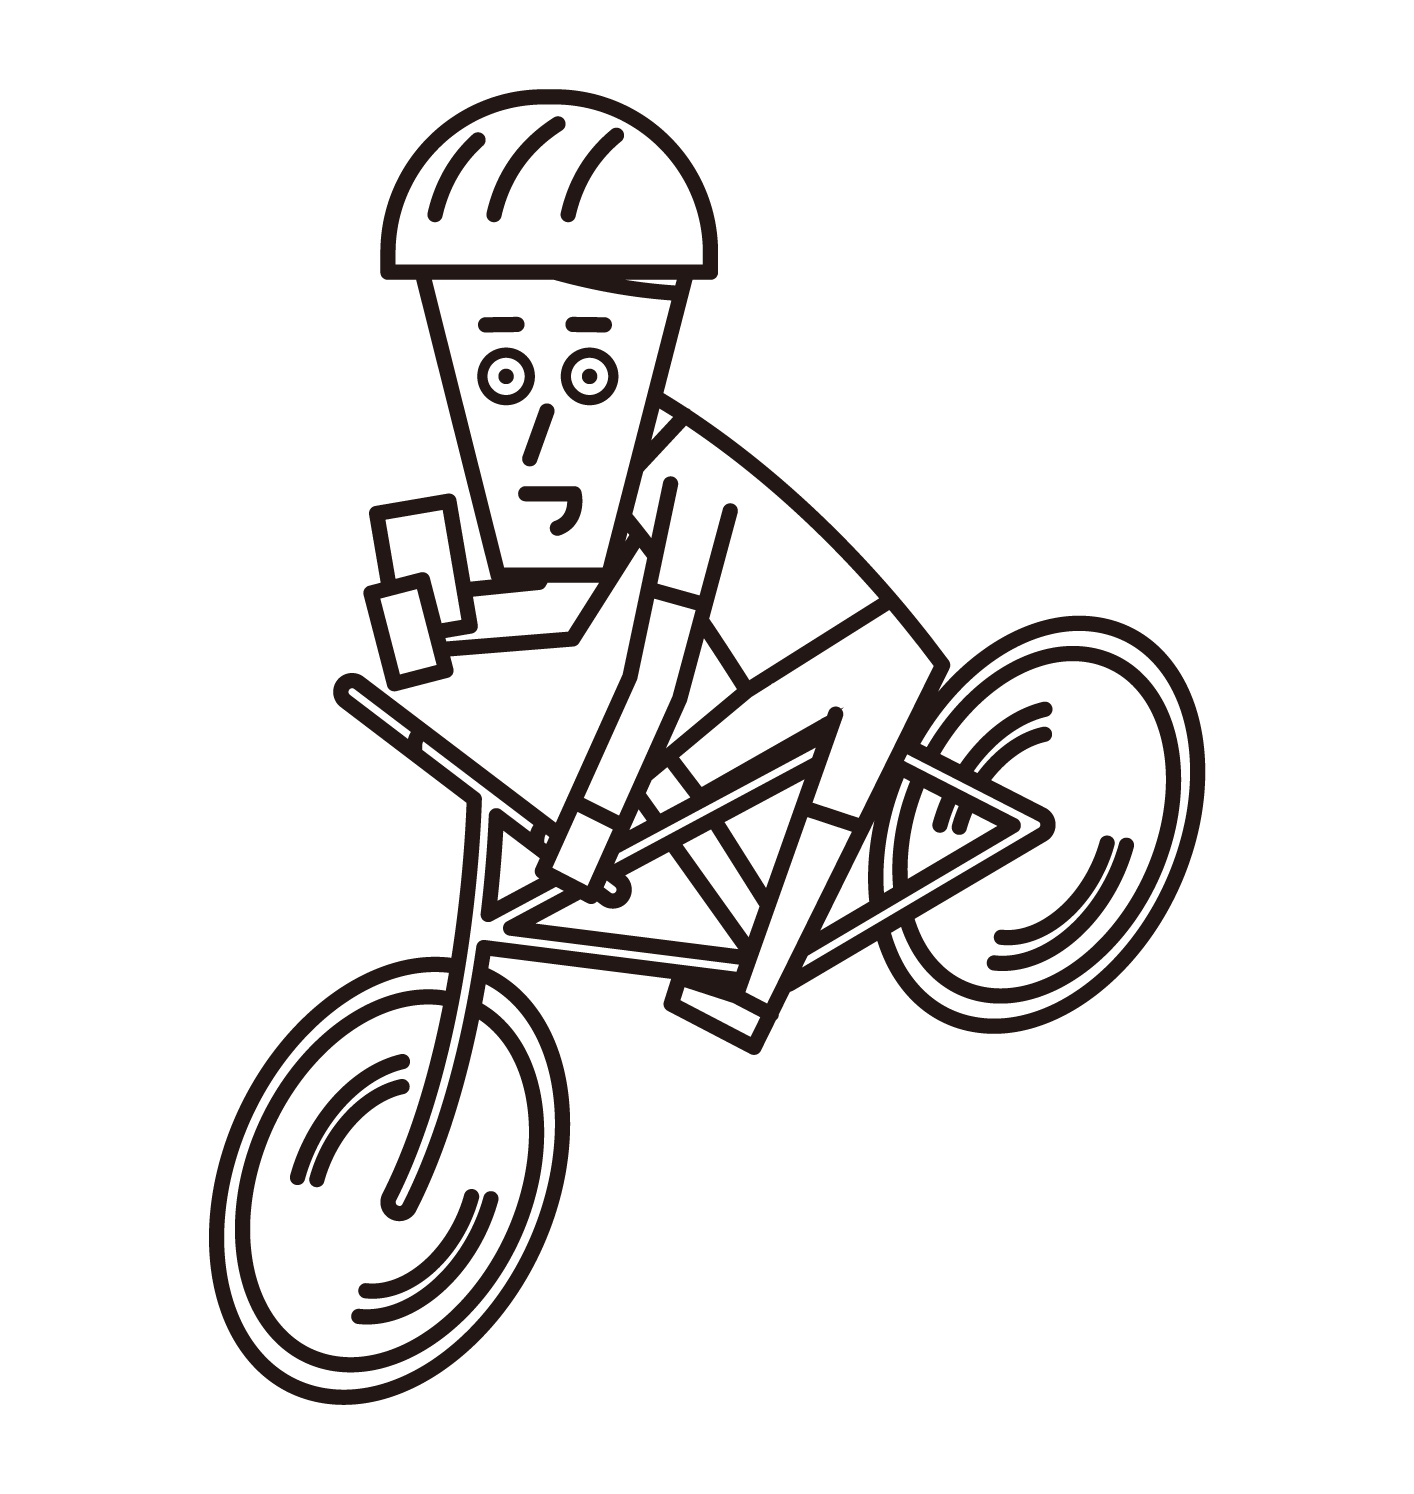 Illustration of a man driving a bicycle while operating a smartphone